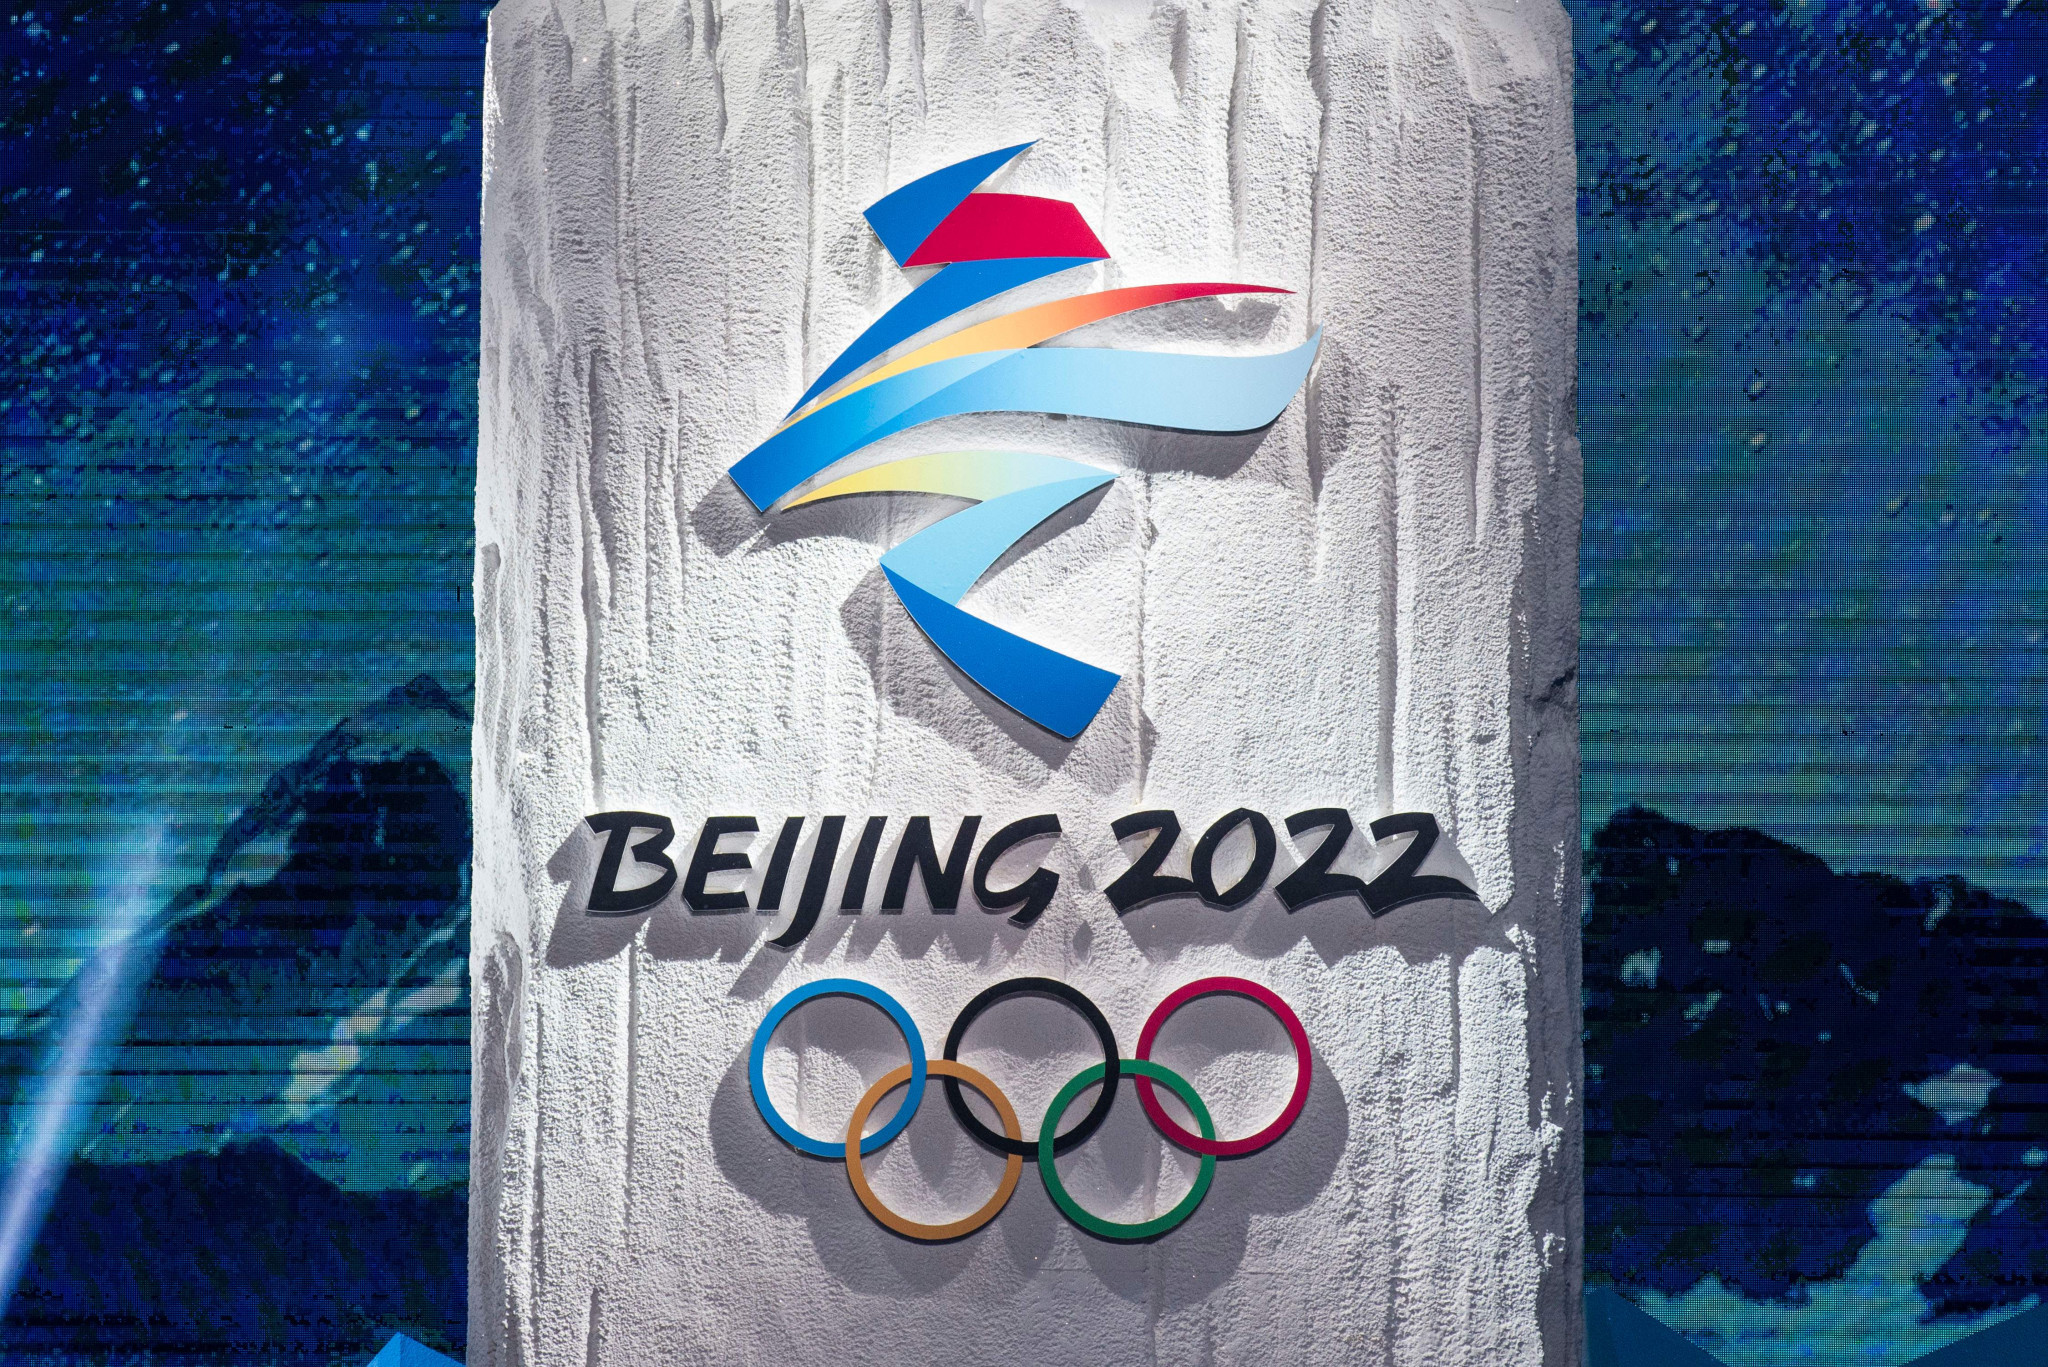 The Beijing 2022 logos were unveiled in December 2017 ©Getty Images